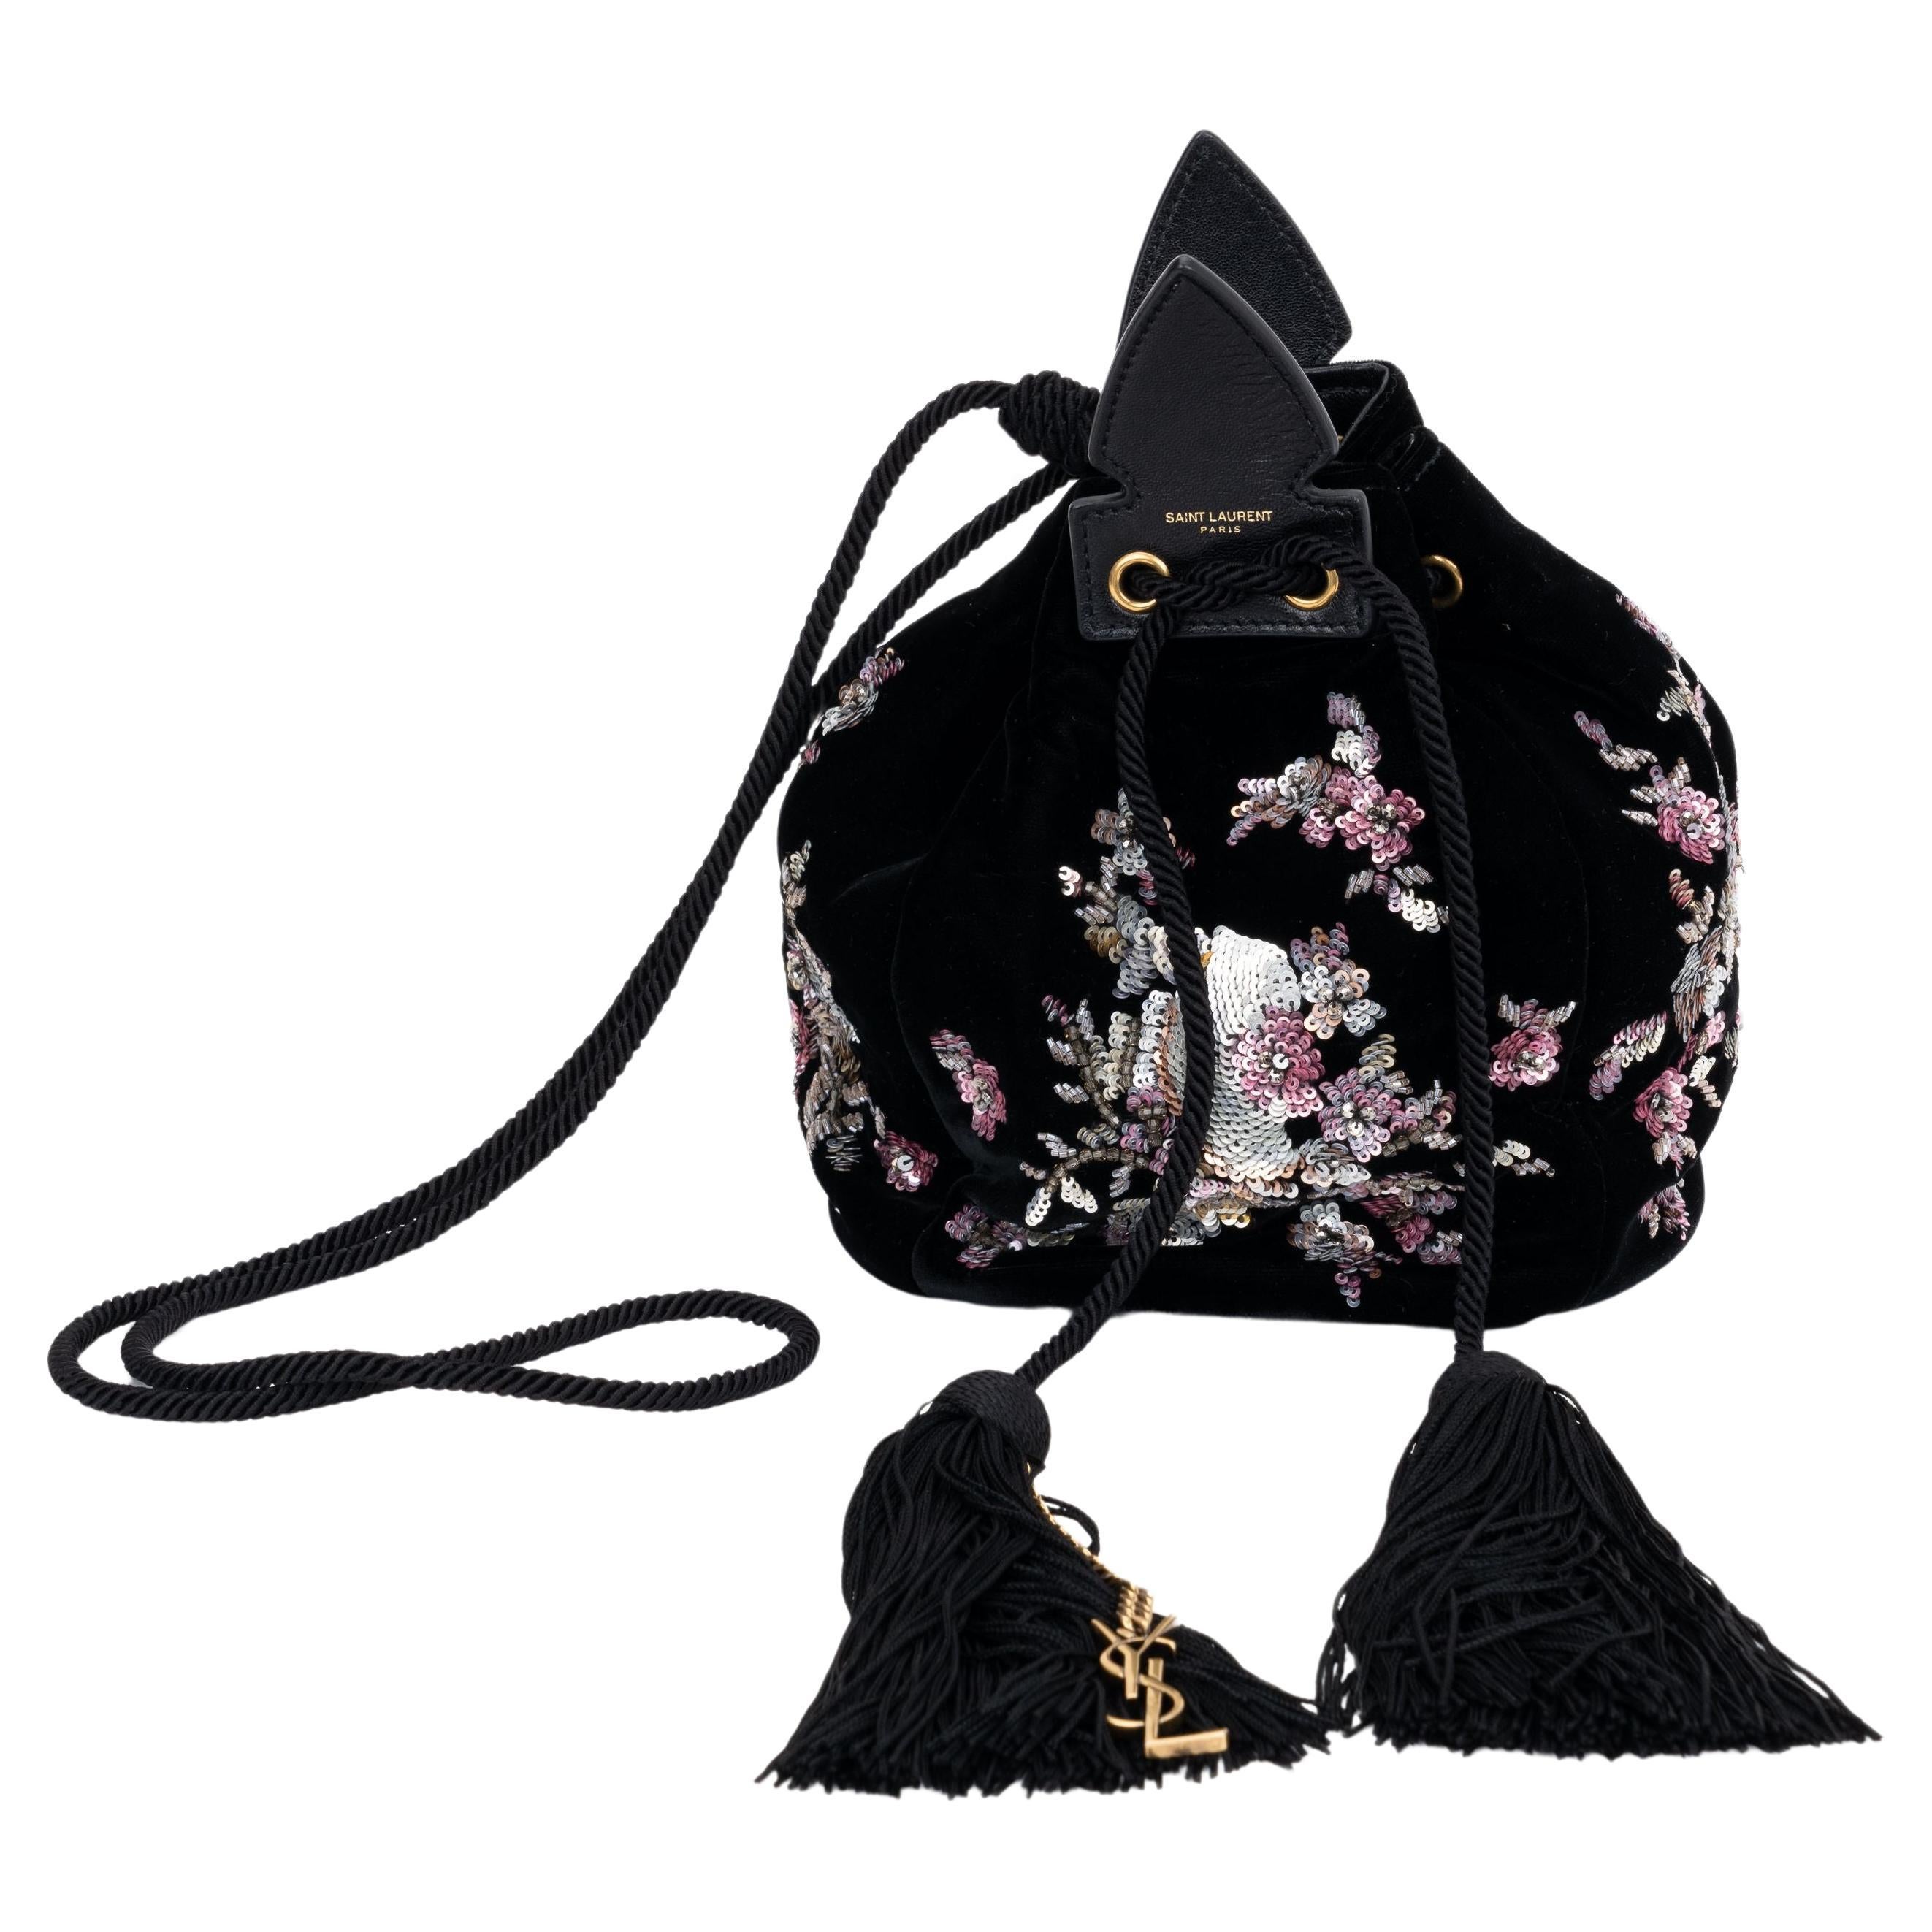 New Ysl Black Embroidered Bucket Bag For Sale